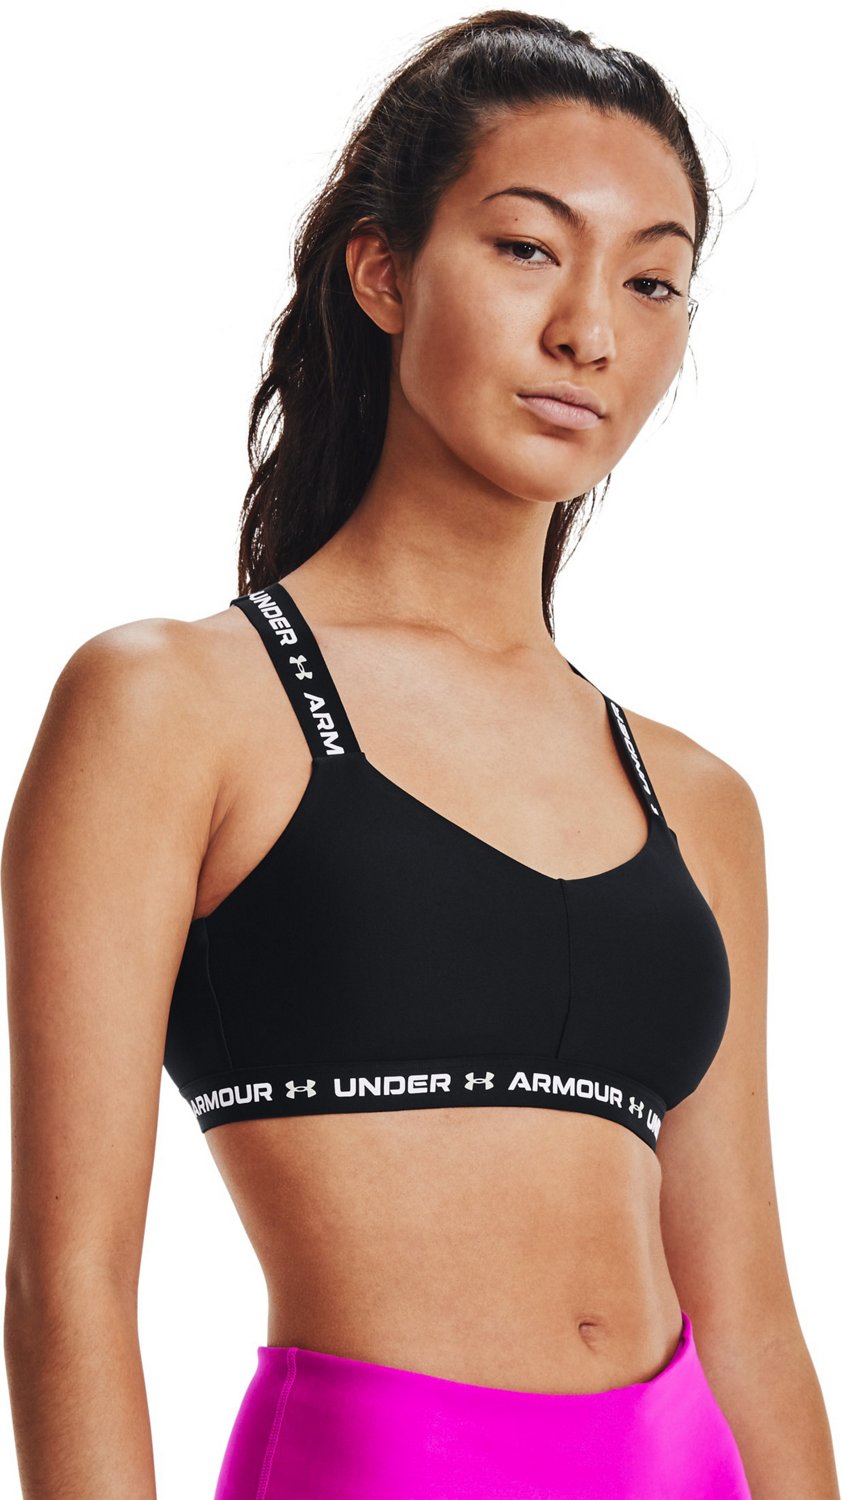 L, Under armour, Sports bras, Womens sports clothing, Sports & leisure